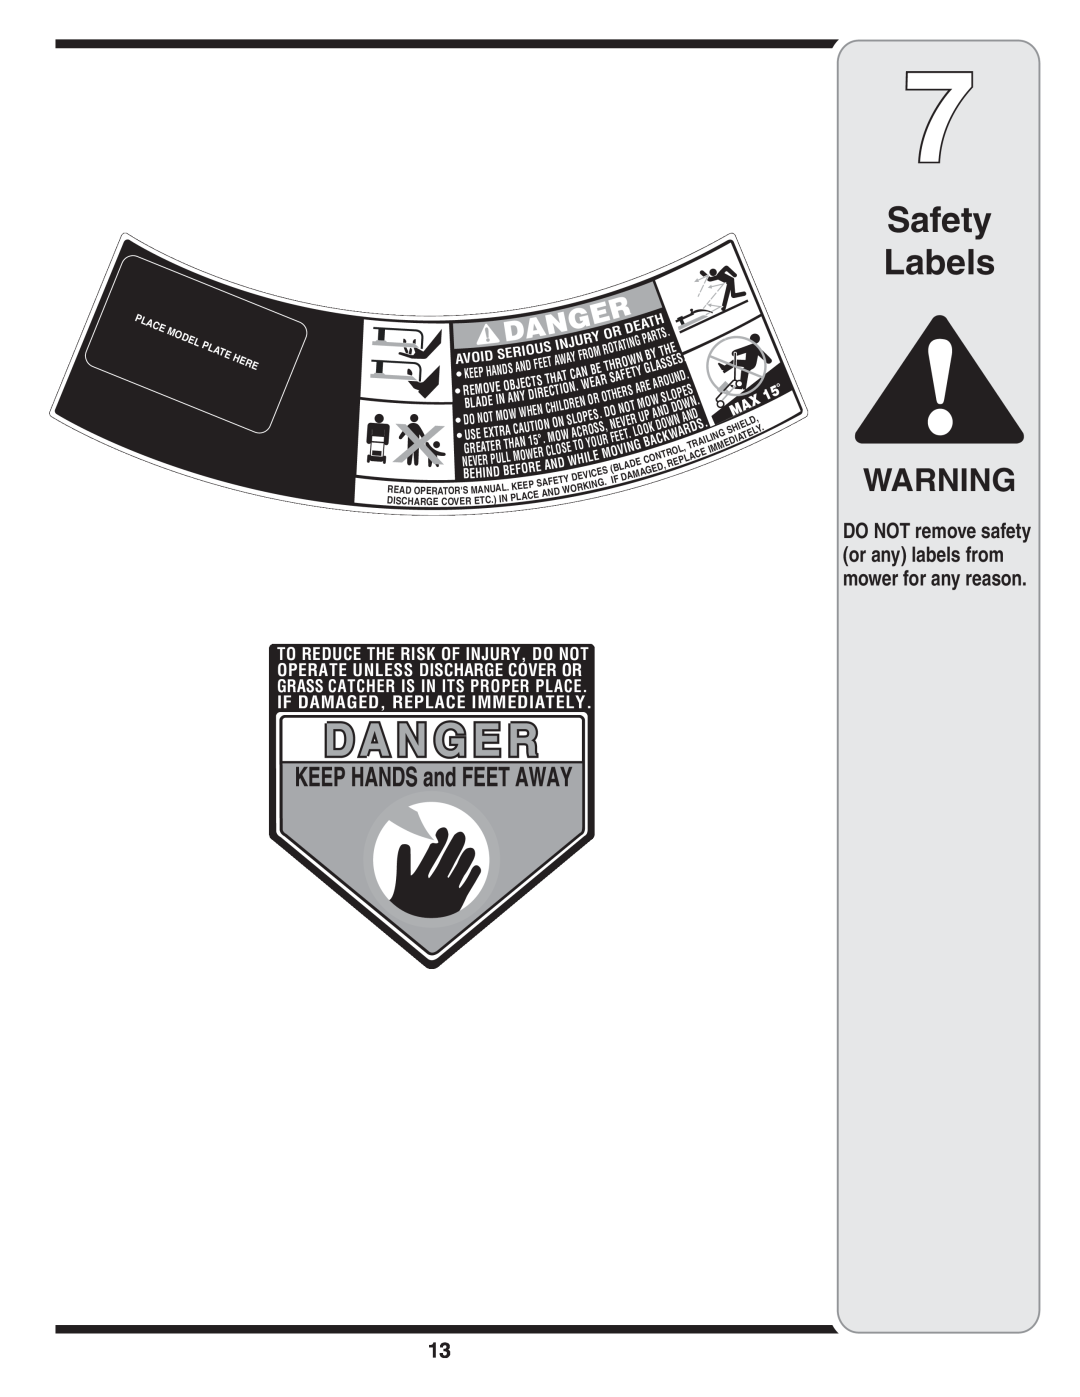 White Outdoor 105 warranty Safety Labels, DO NOT remove safety or any labels from mower for any reason 